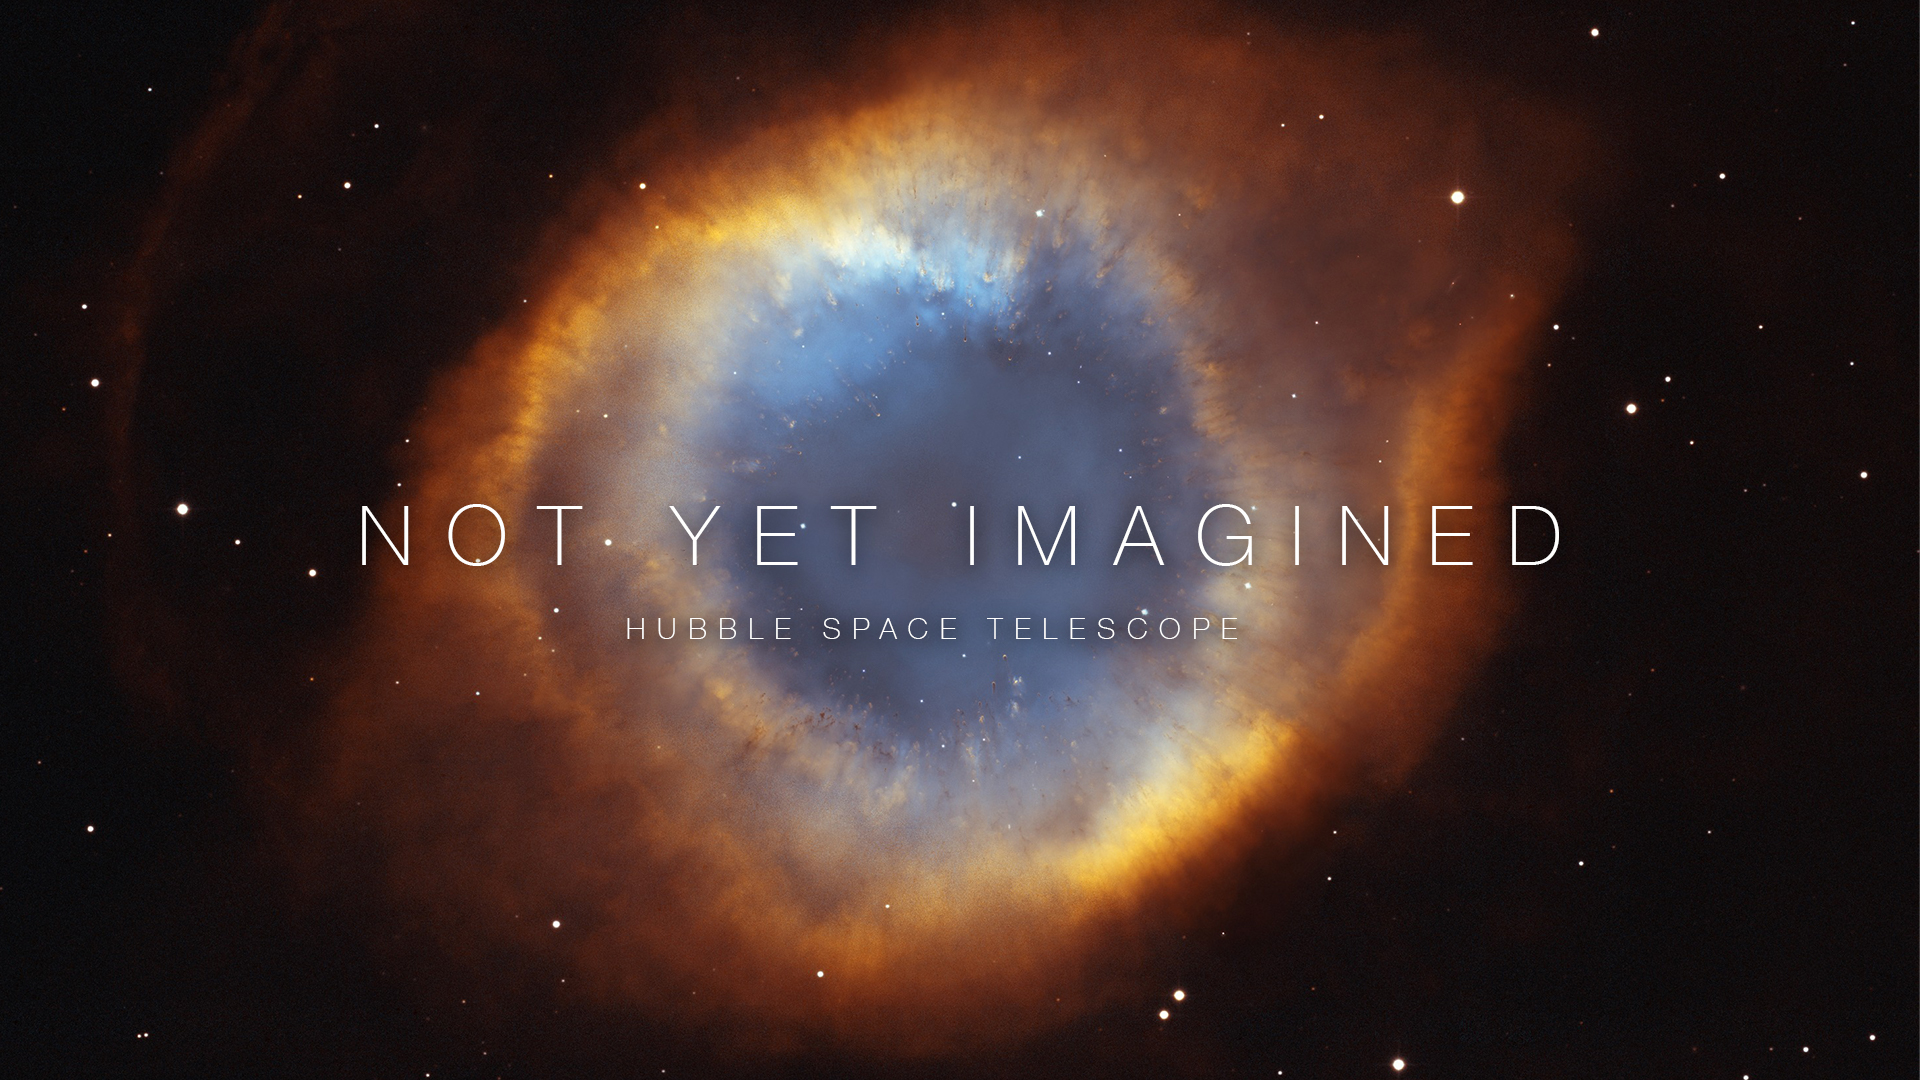 Preview Image for Hubble: Not Yet Imagined